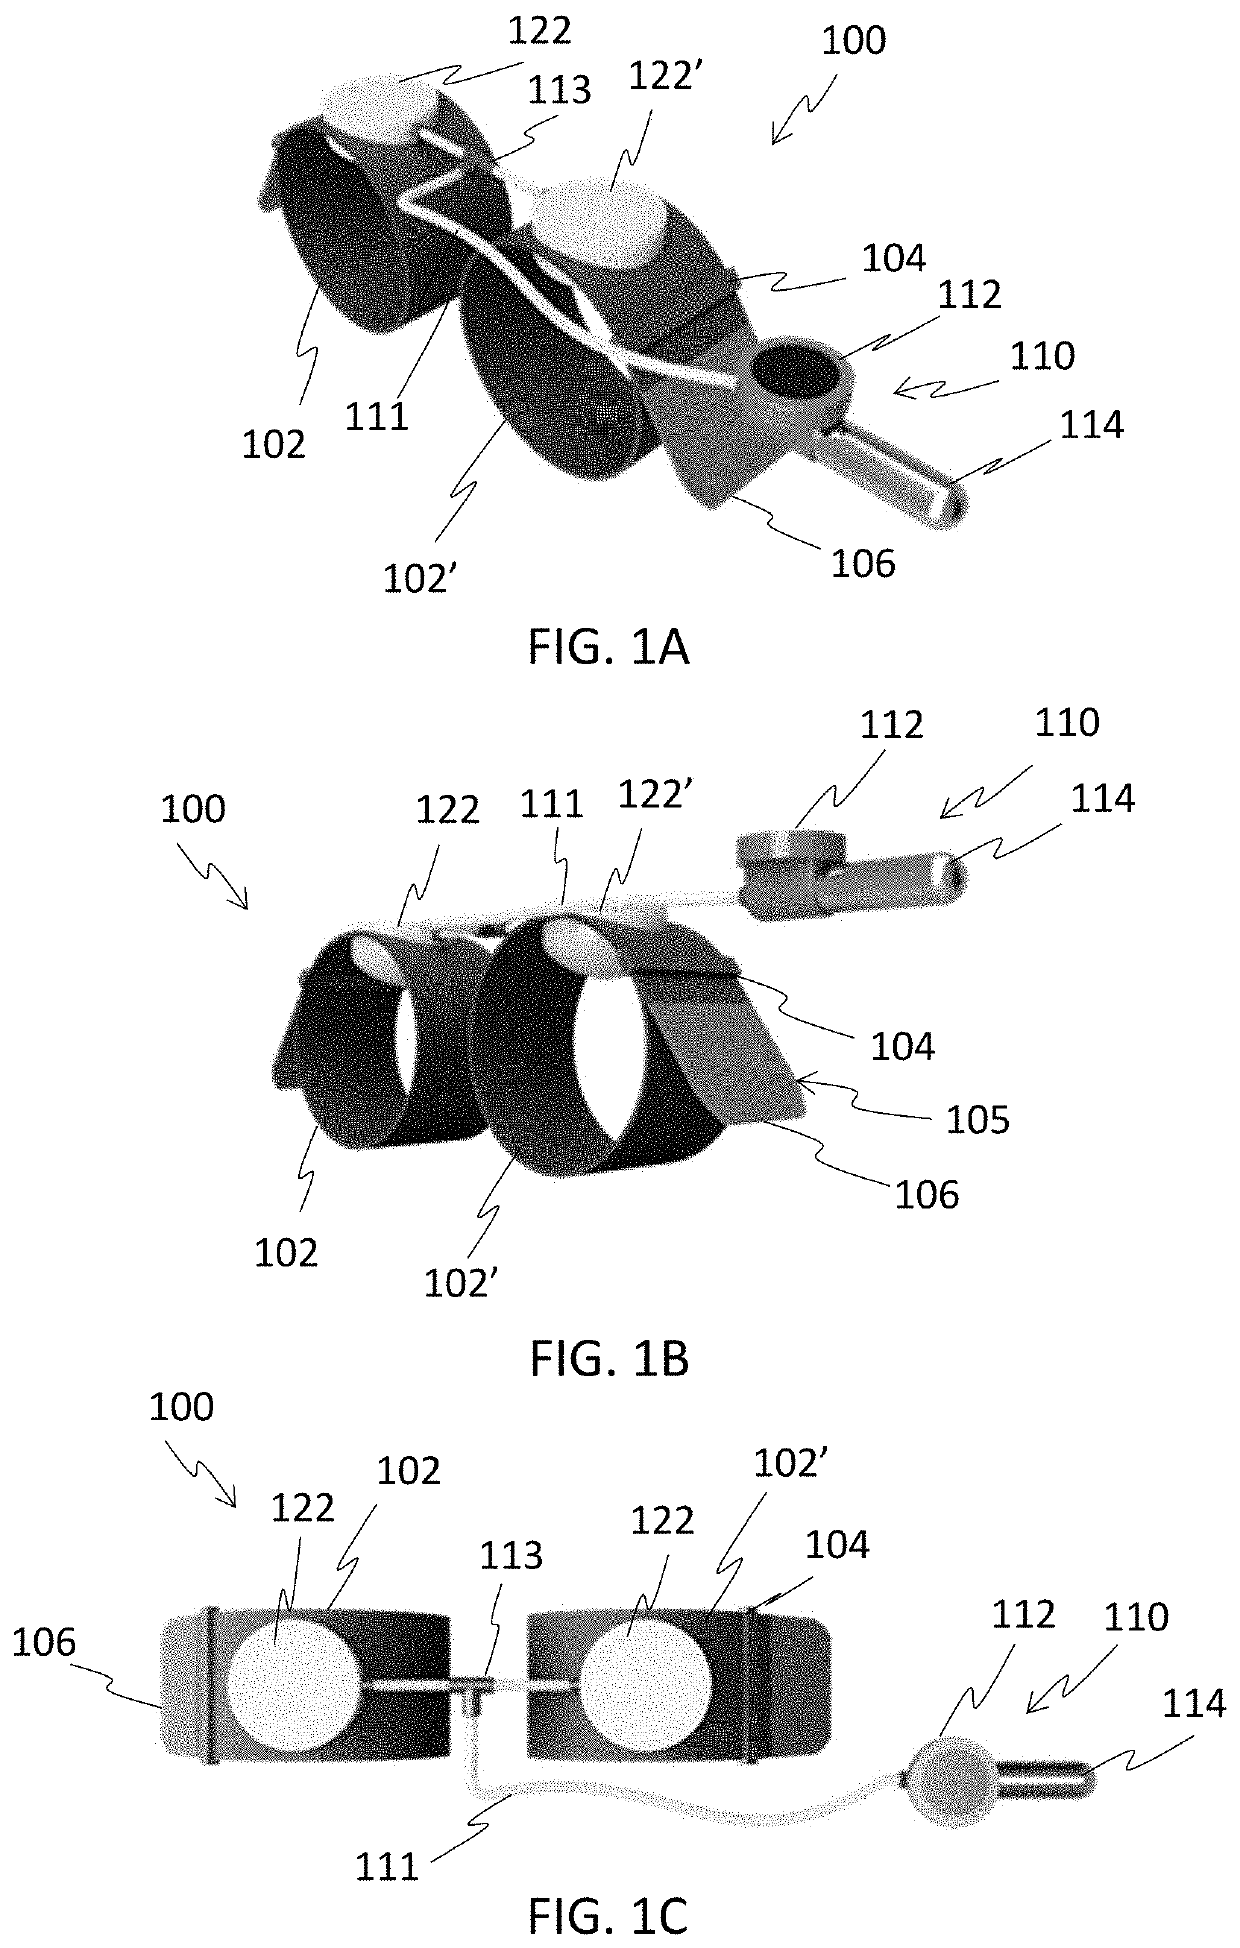 External vascular compression device for use during cardiac arrest